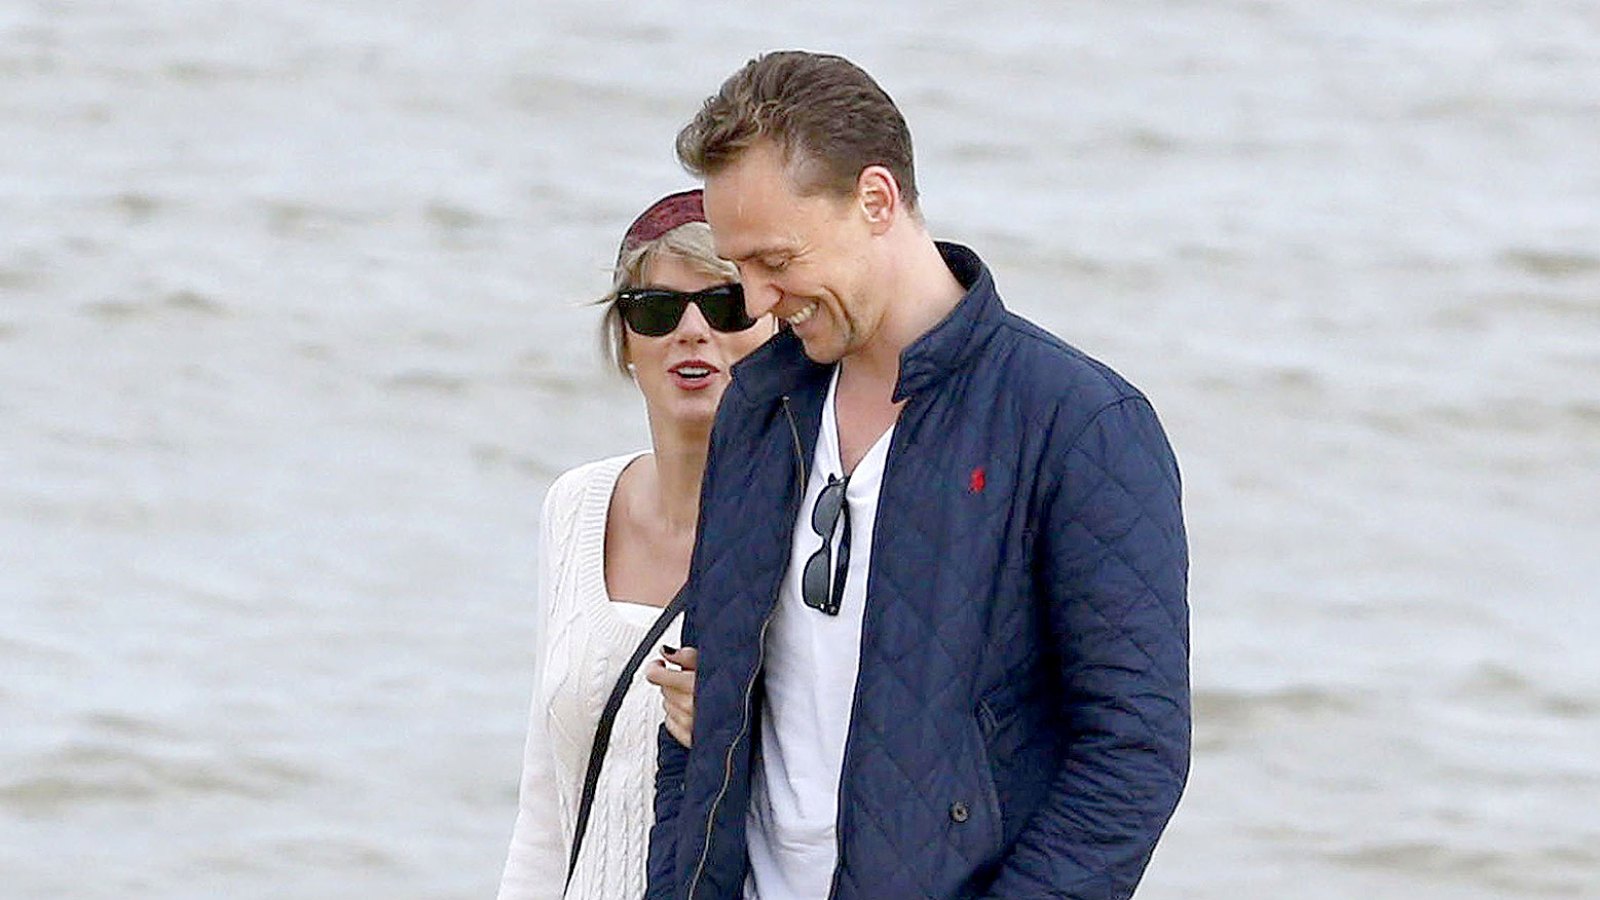 Tom Hiddleston and Taylor Swift in Suffolk, UK on June 26, 2016.